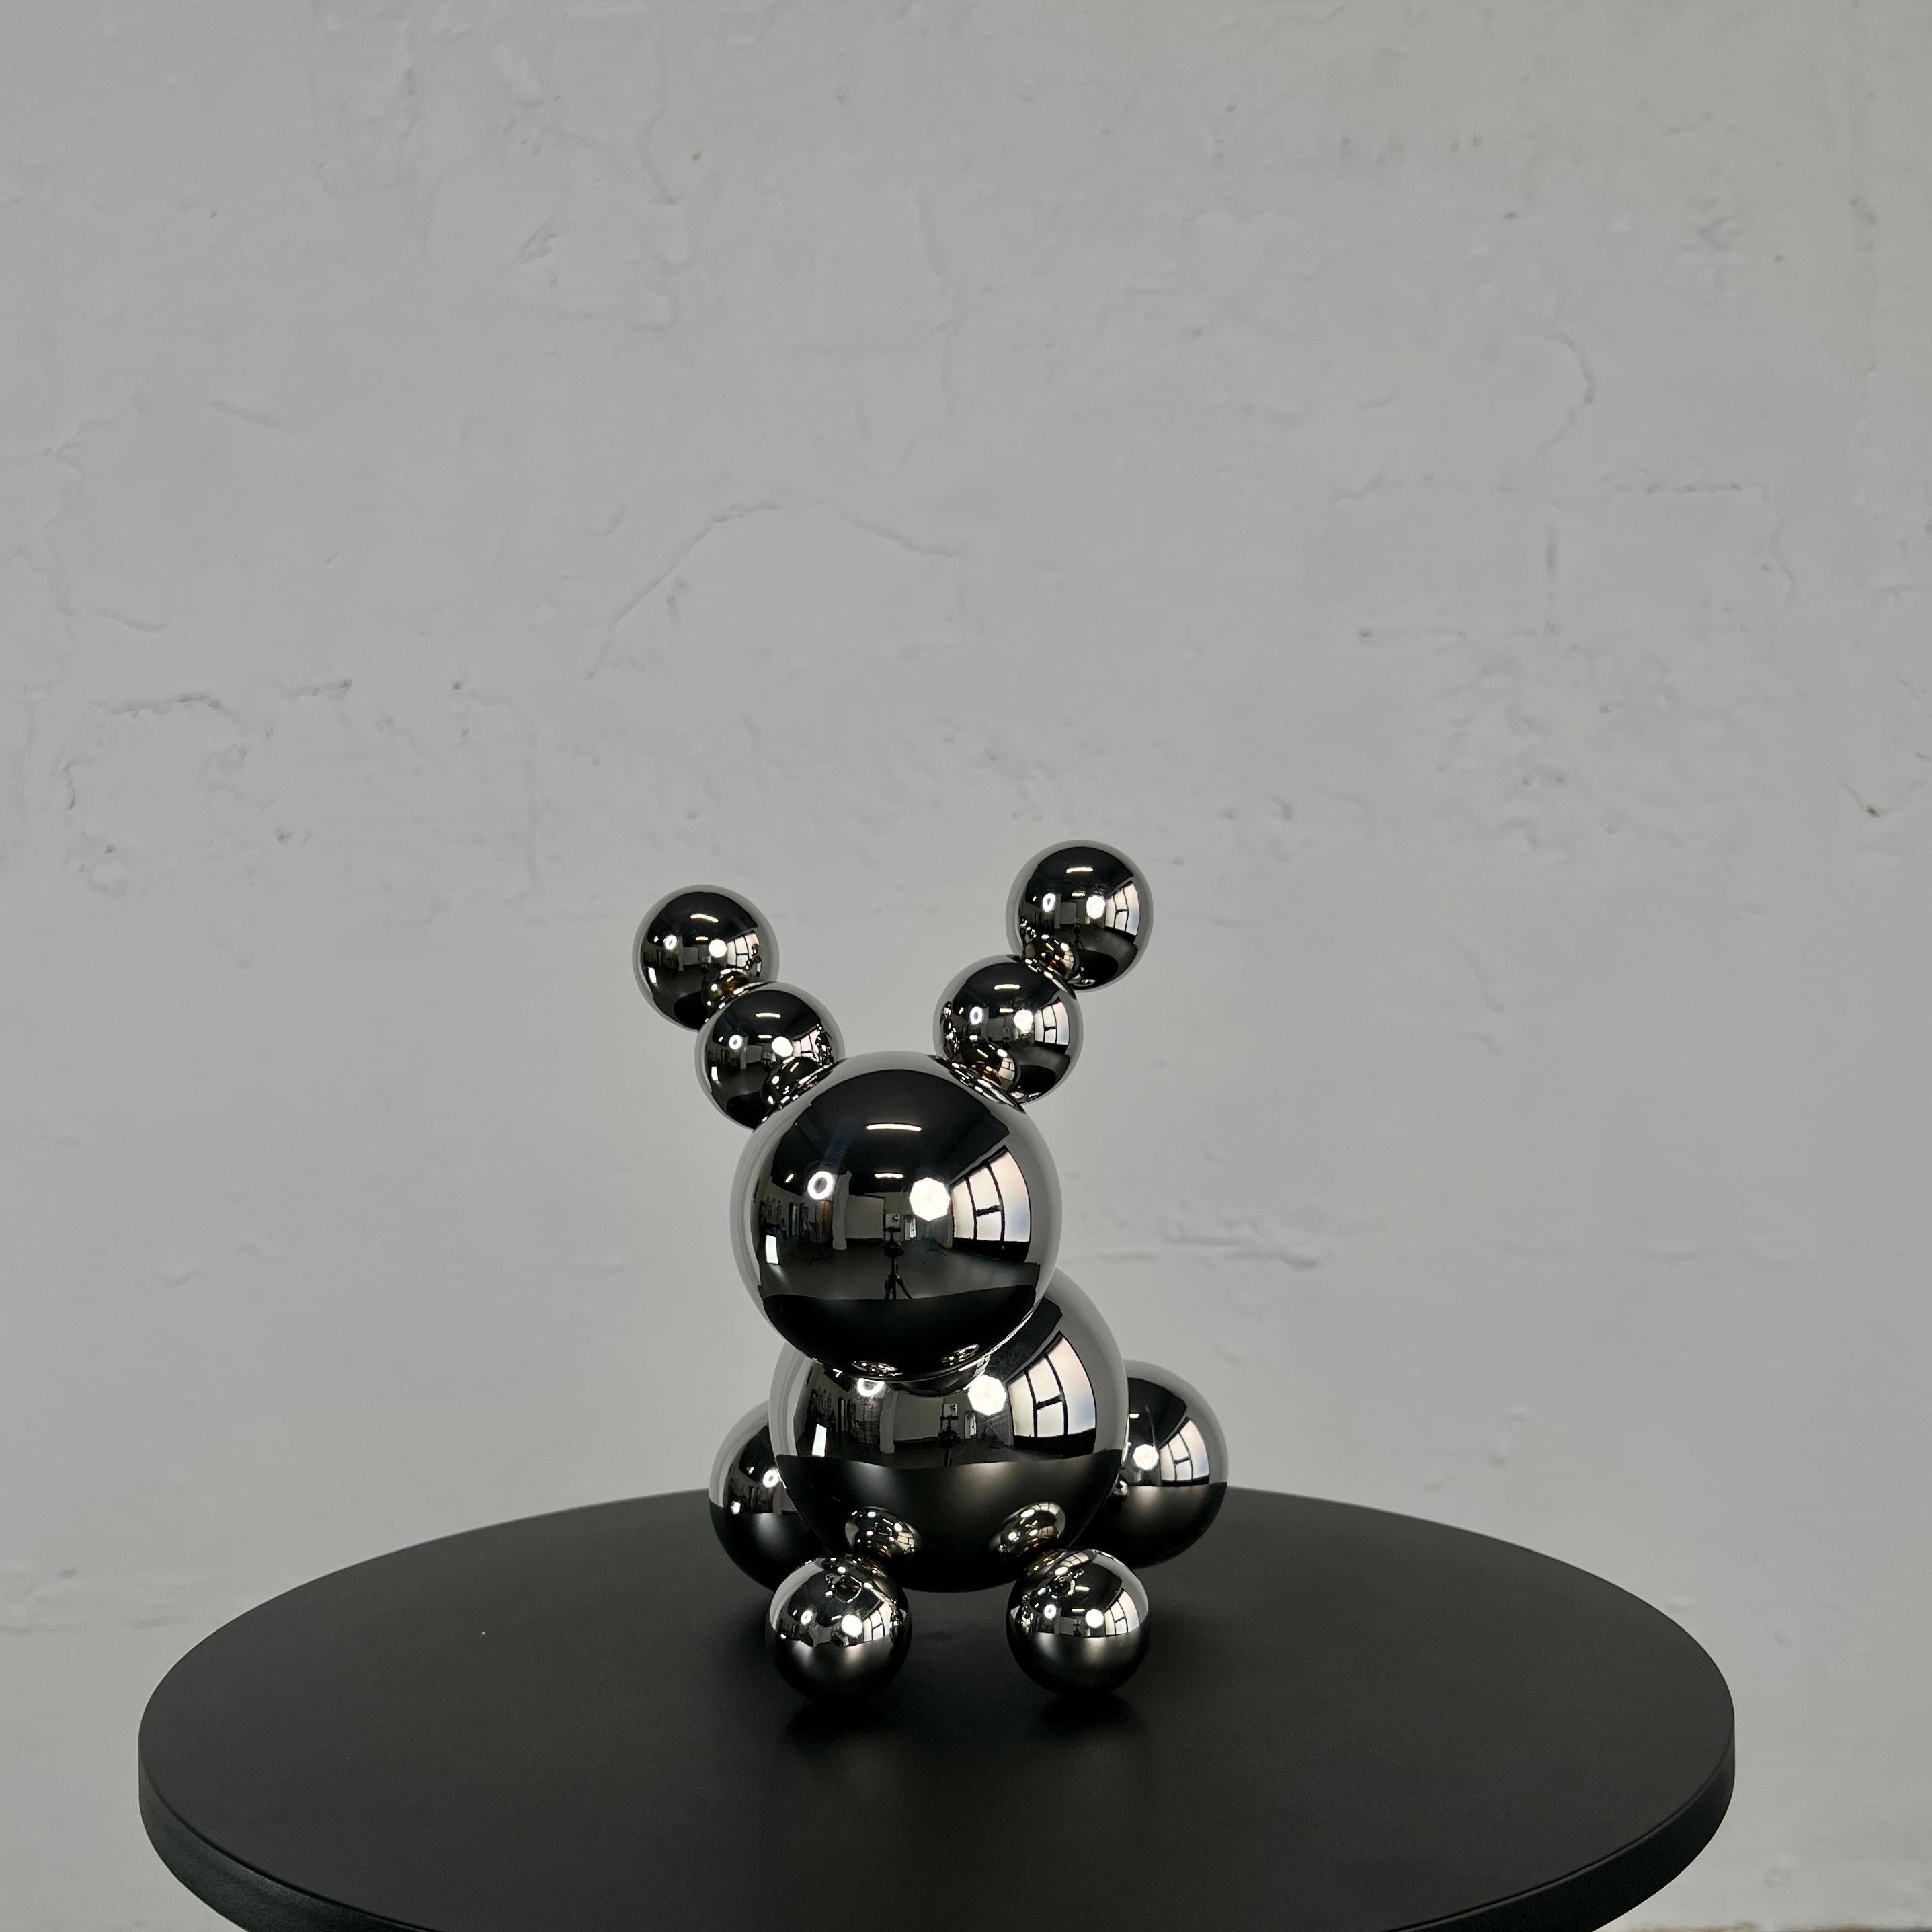 Stainless Steel Rabbit Bunny Robot 'Ears Up!' Minimalistic Art For Sale 4